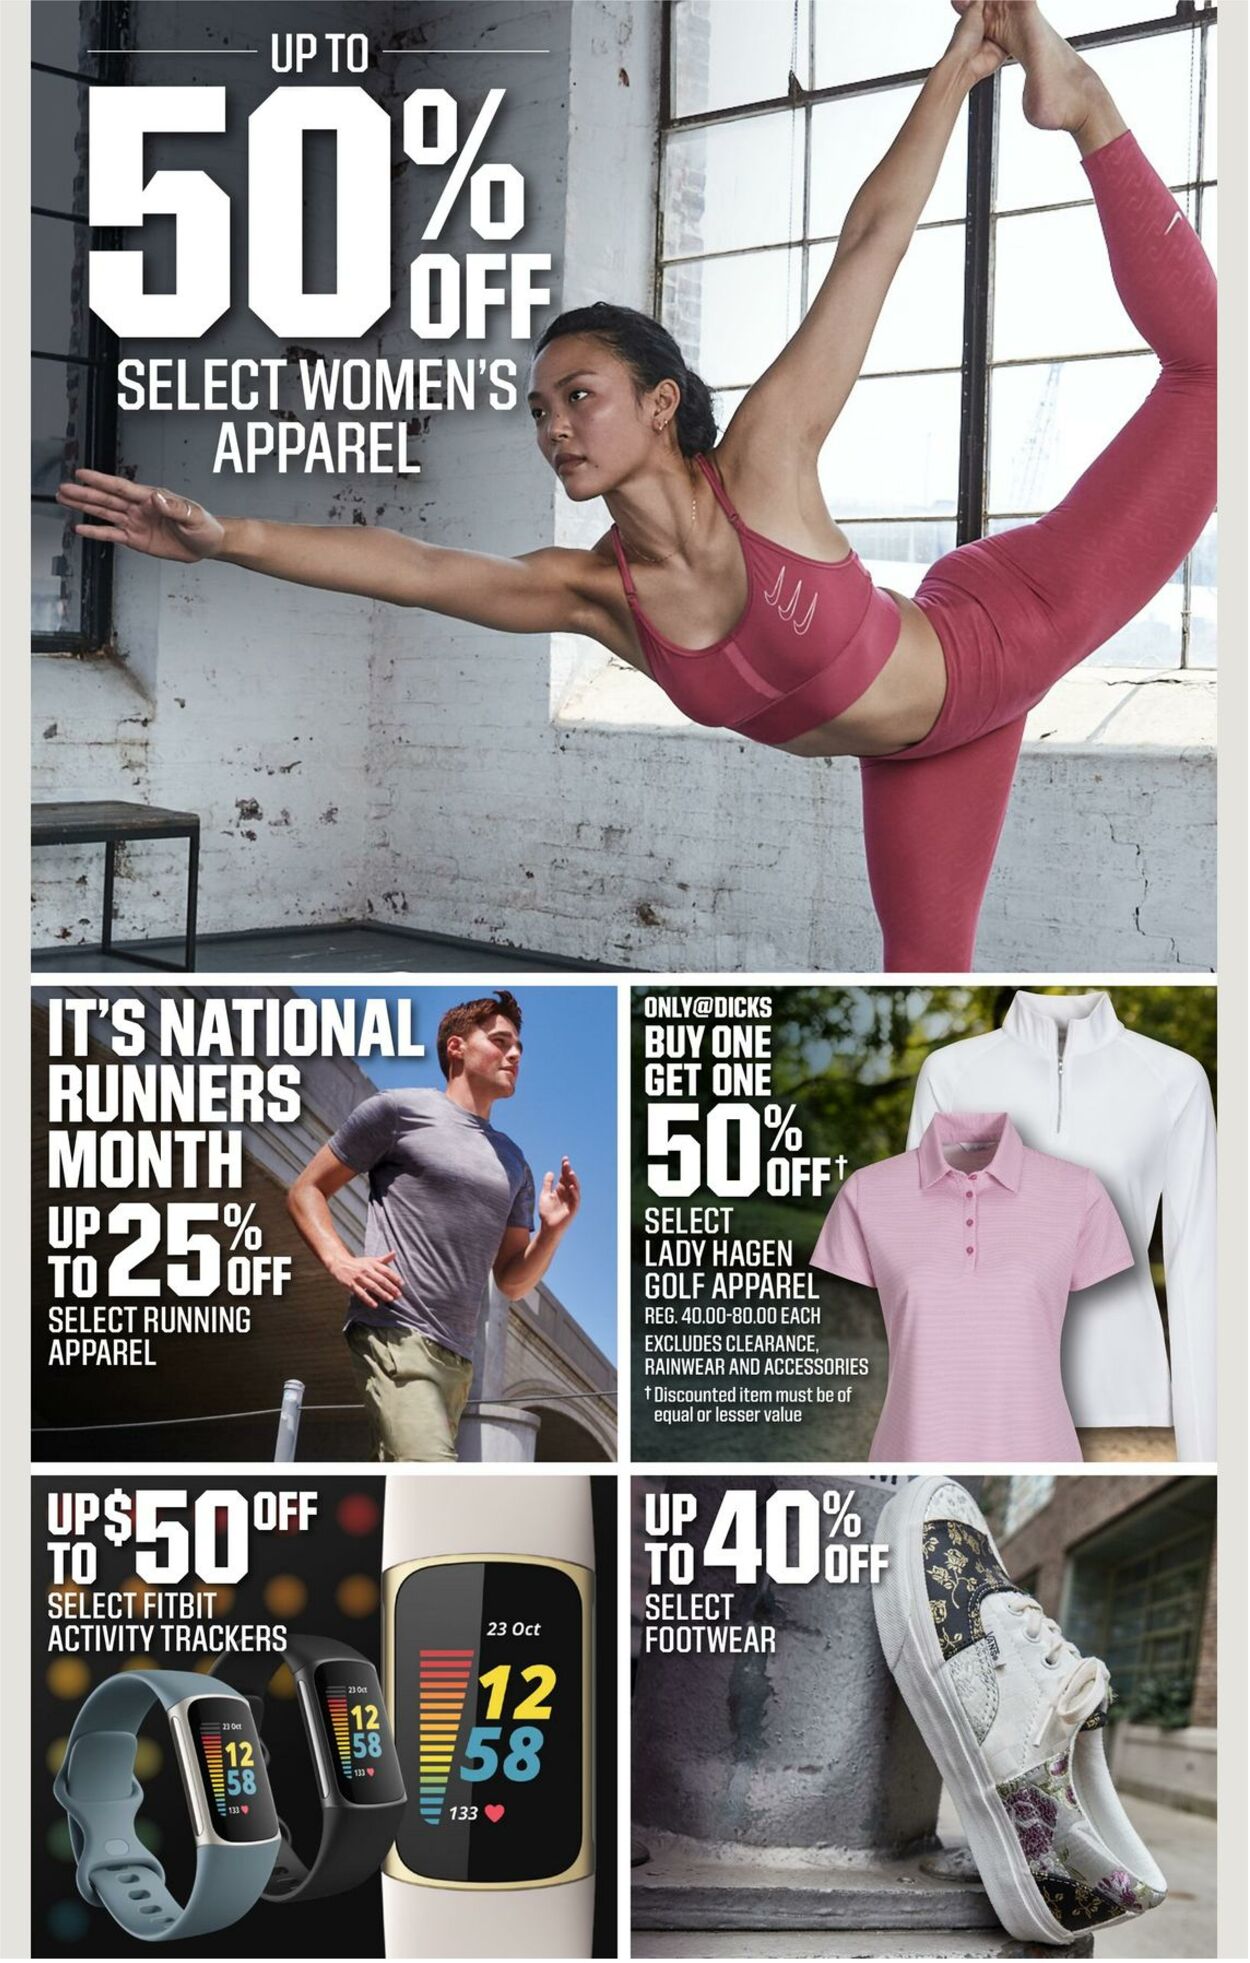 Weekly ad Dick's Sporting Goods 05/01/2022 - 05/07/2022